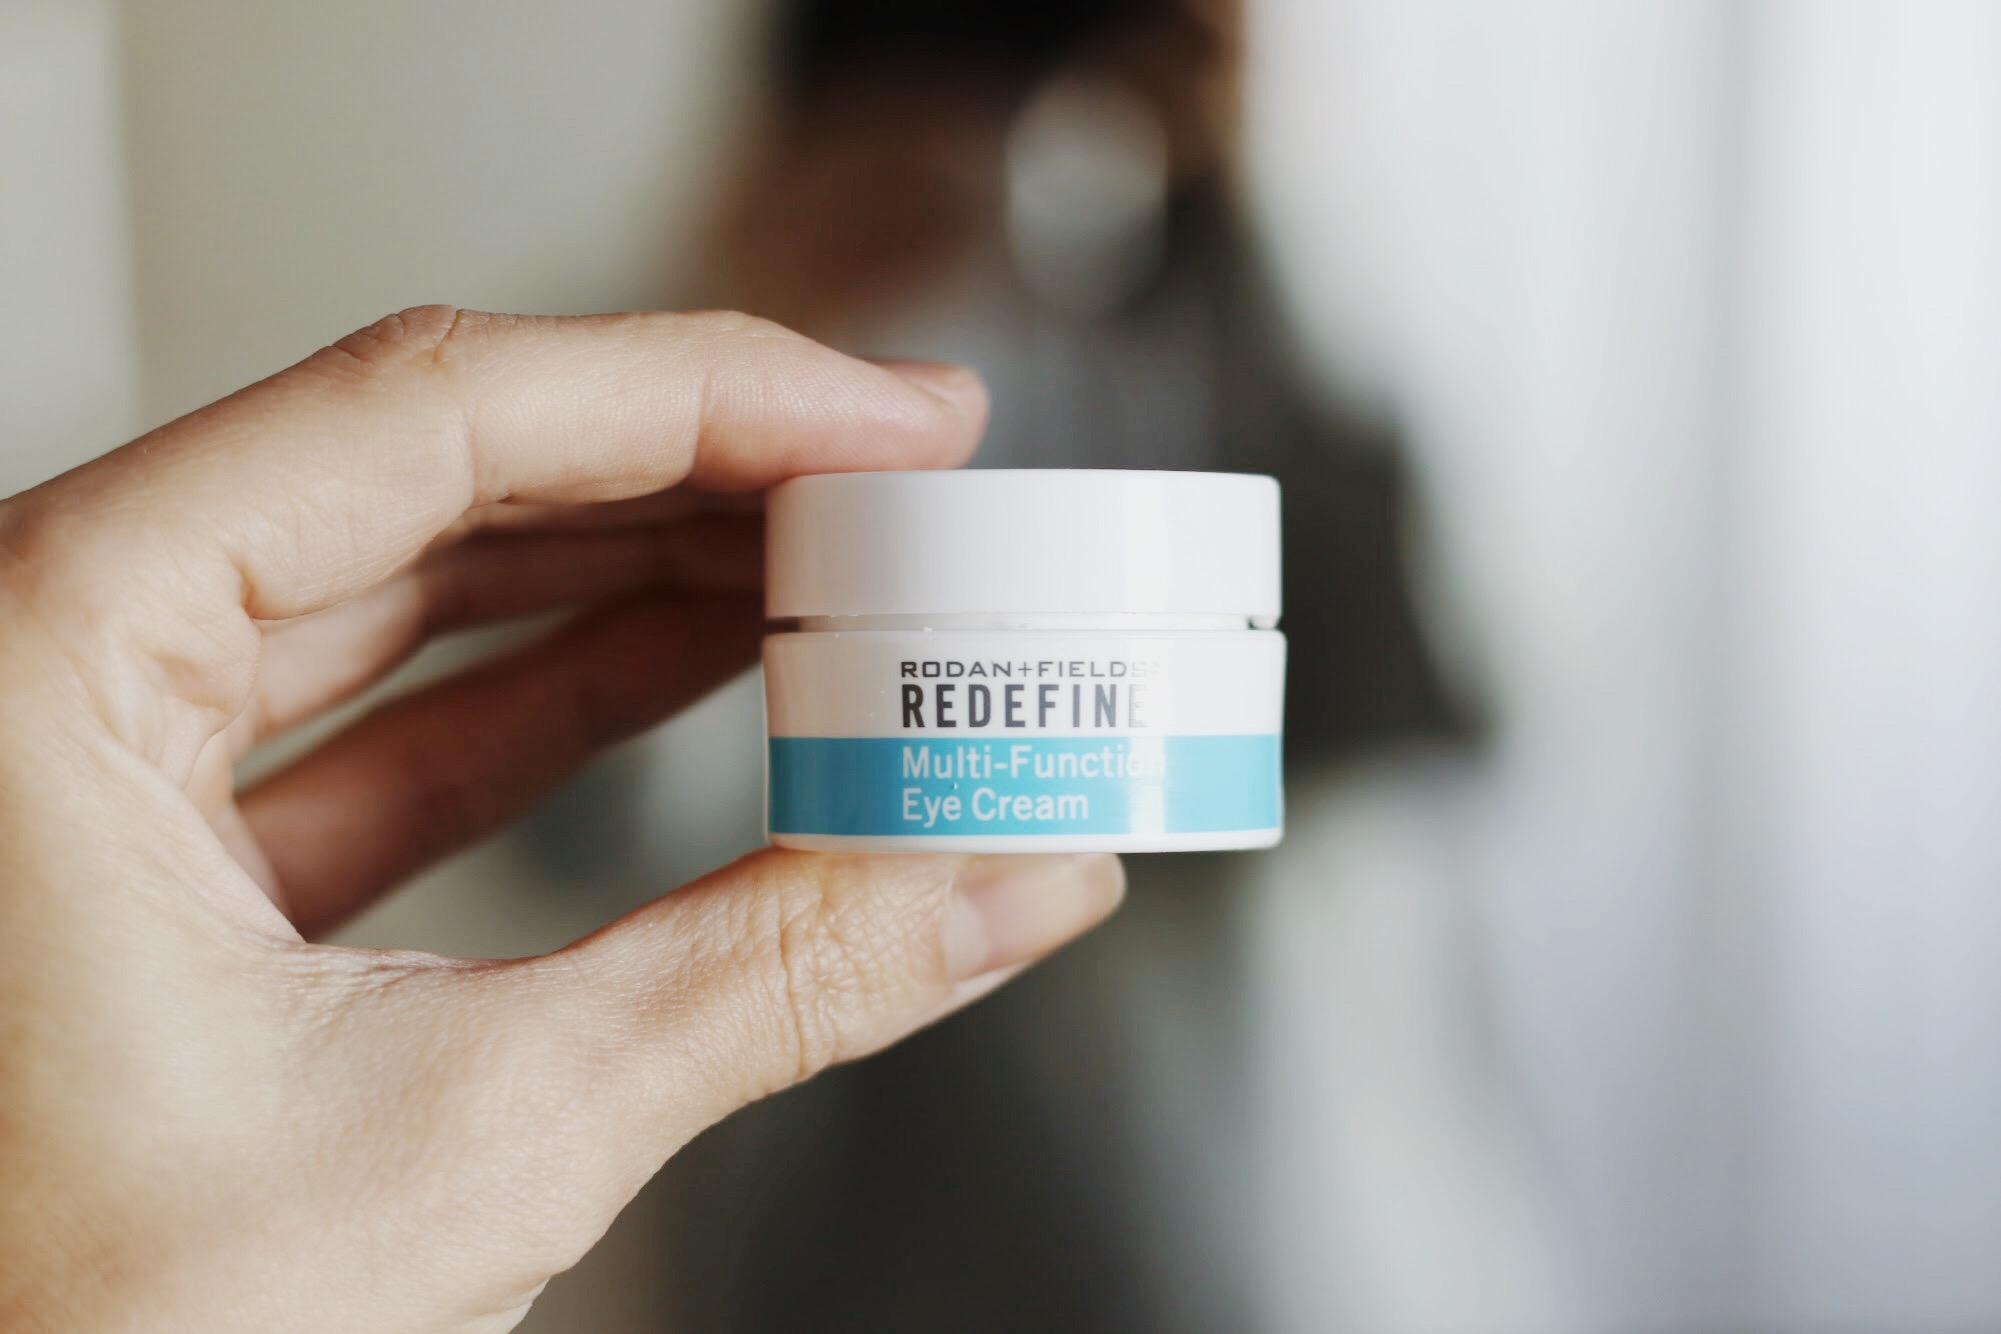  7.  Rodan and Fields Eye Cream  -  I got on the RF bandwagon a couple years ago and I love it. I'm using other things on my face right now, (still think it's great, just get excited about new products), but I have clung to this eye cream. Works wonders on puffiness and dark circles. 